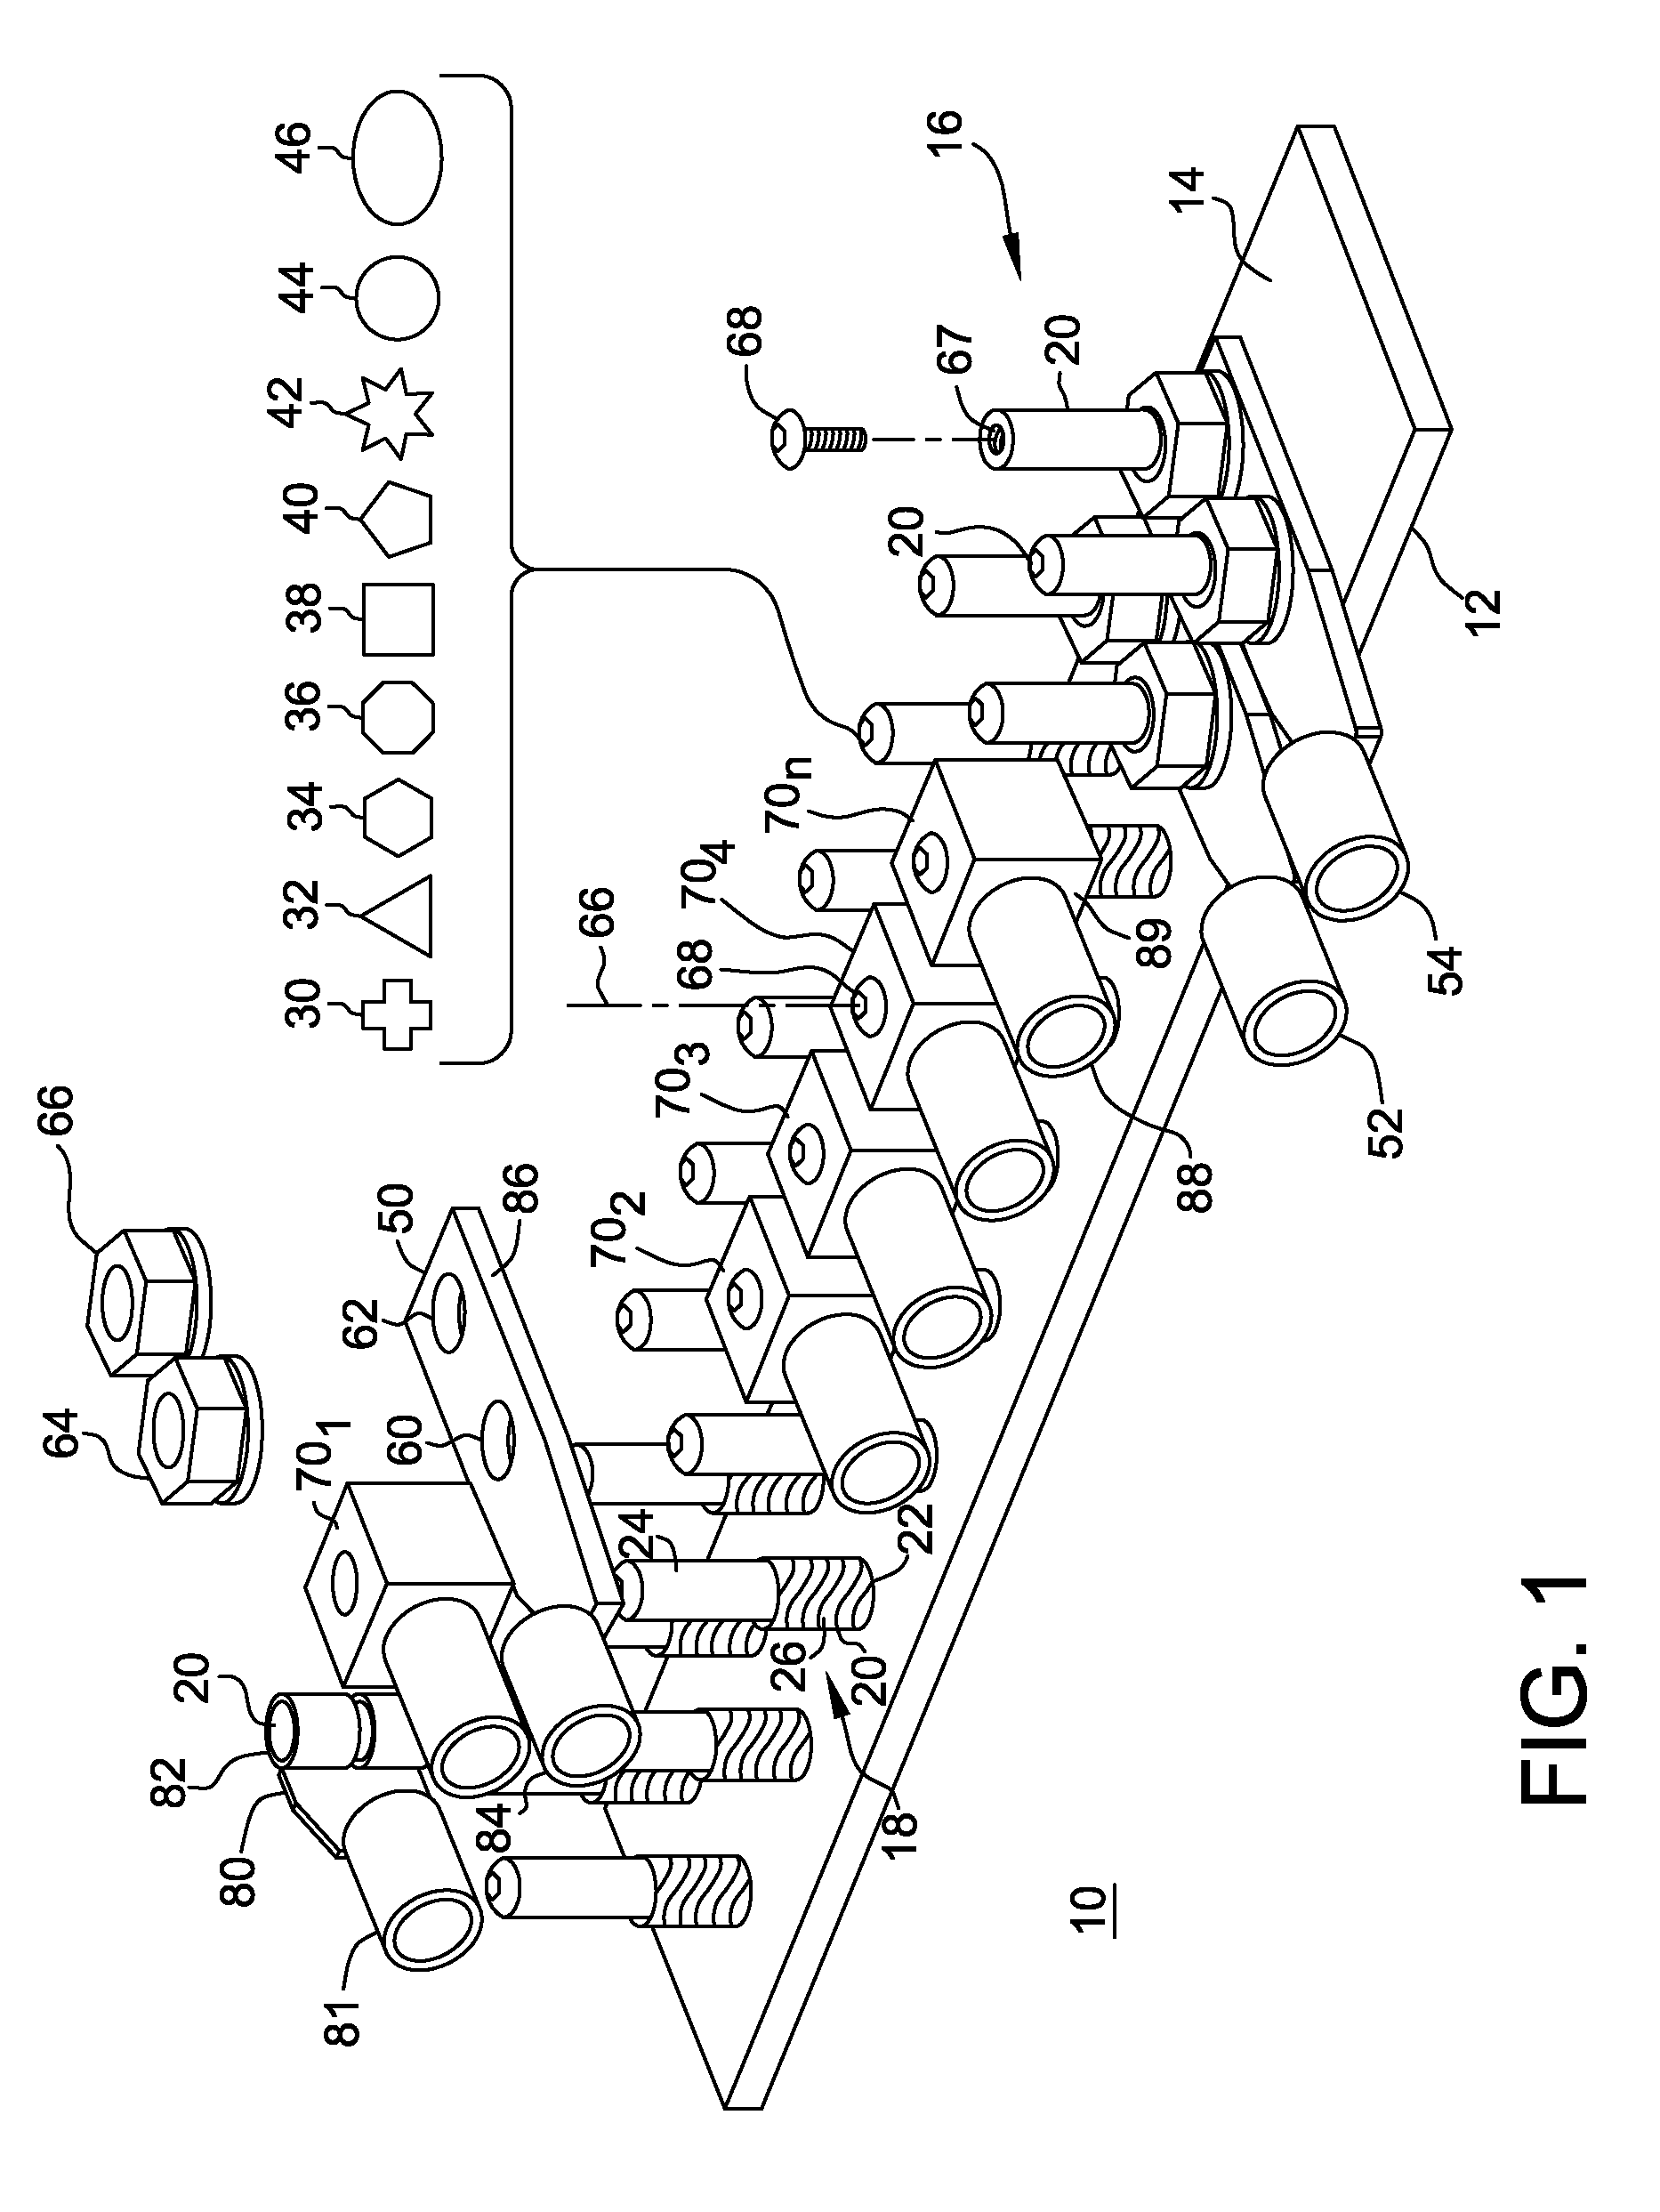 Apparatus and method for effecting electrical termination with a plurality of types of termination structures